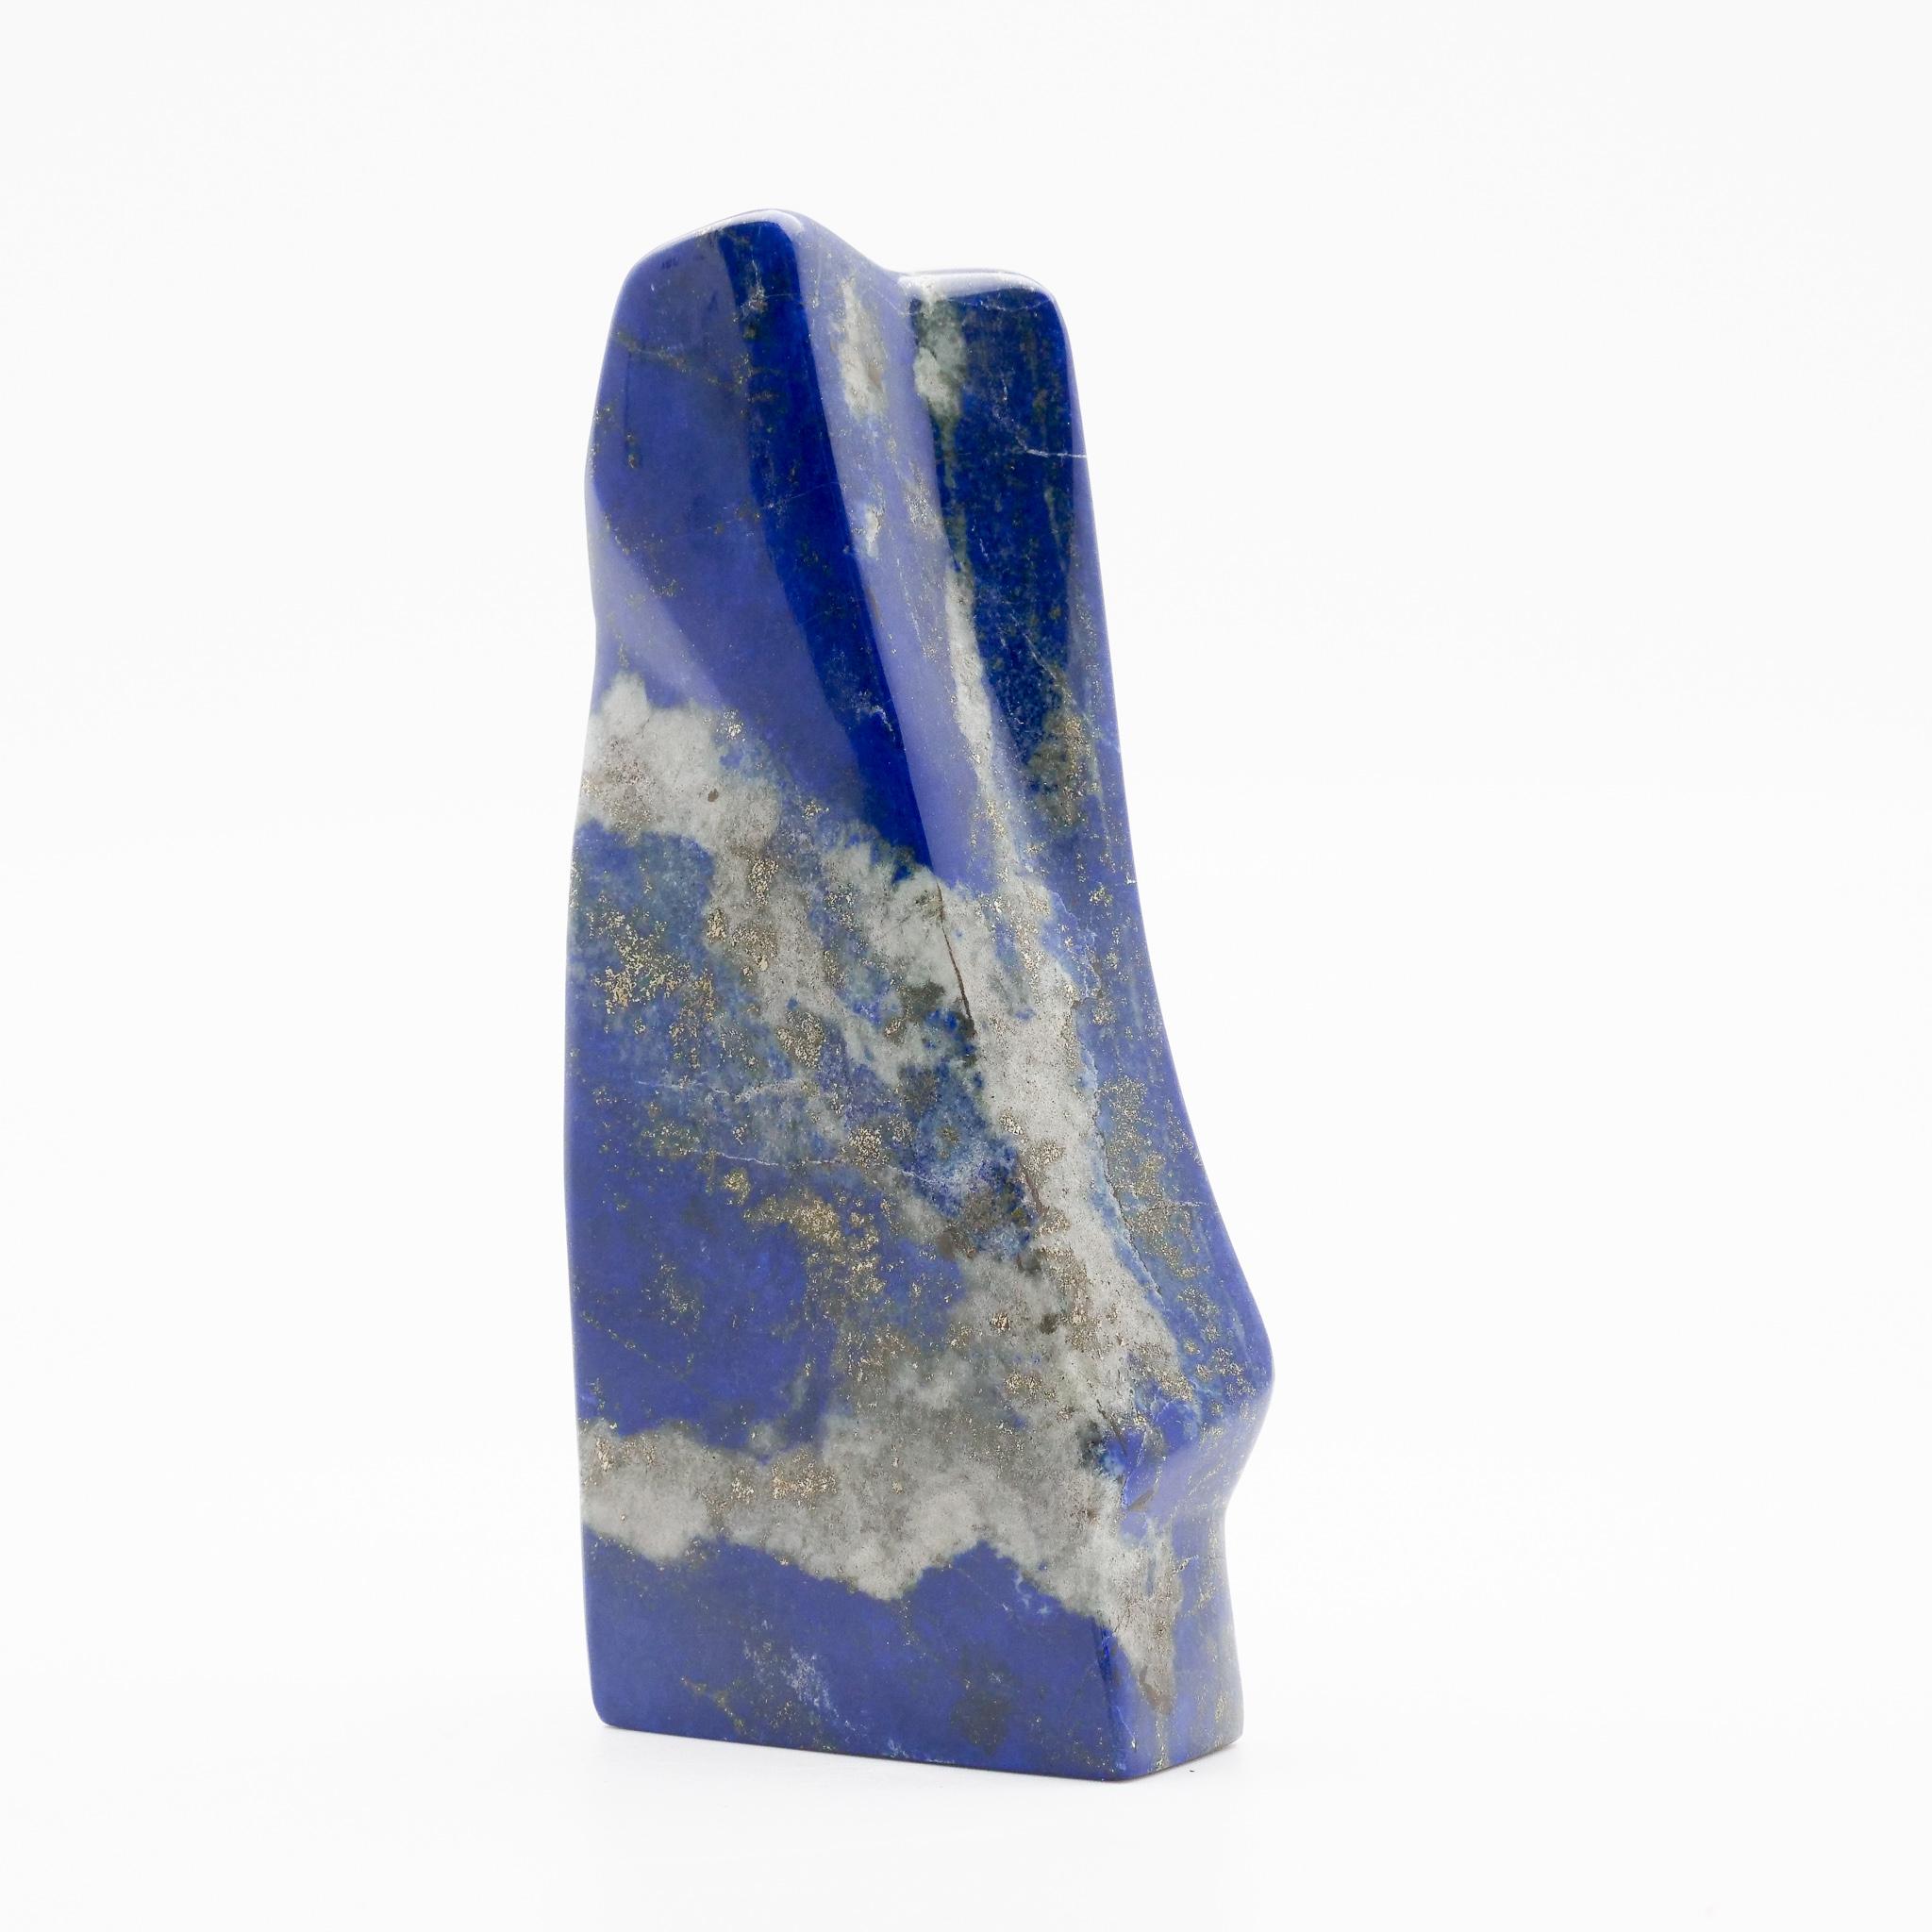 Beautifully polished lapis lazuli mineral specimen from Afghanistan. This semi-precious stone has been prized since antiquity due to its intense, beautiful blue coloring and golden speckles (pyrite flecks). It was also used in the Fine arts, in a